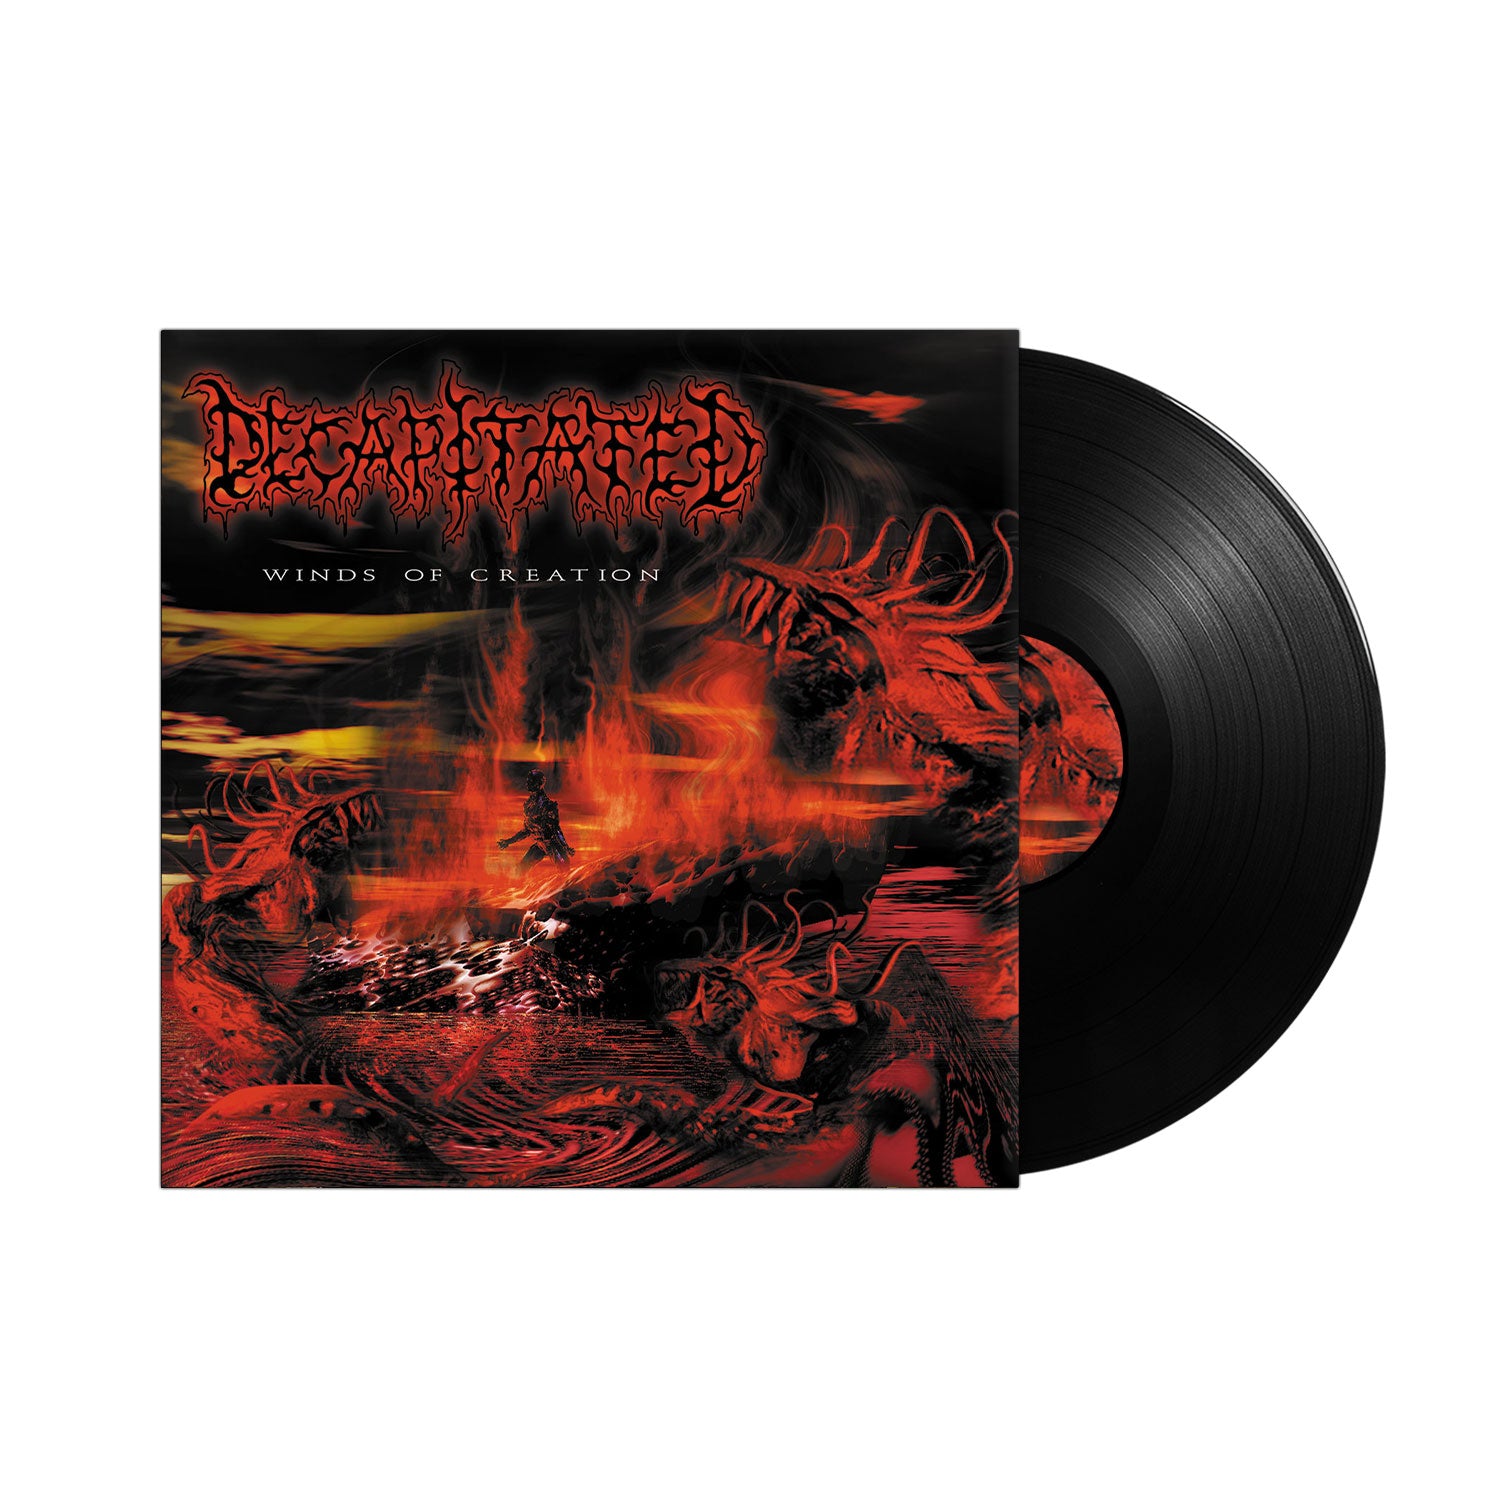 Decapitated "Winds Of Creation" Black Vinyl